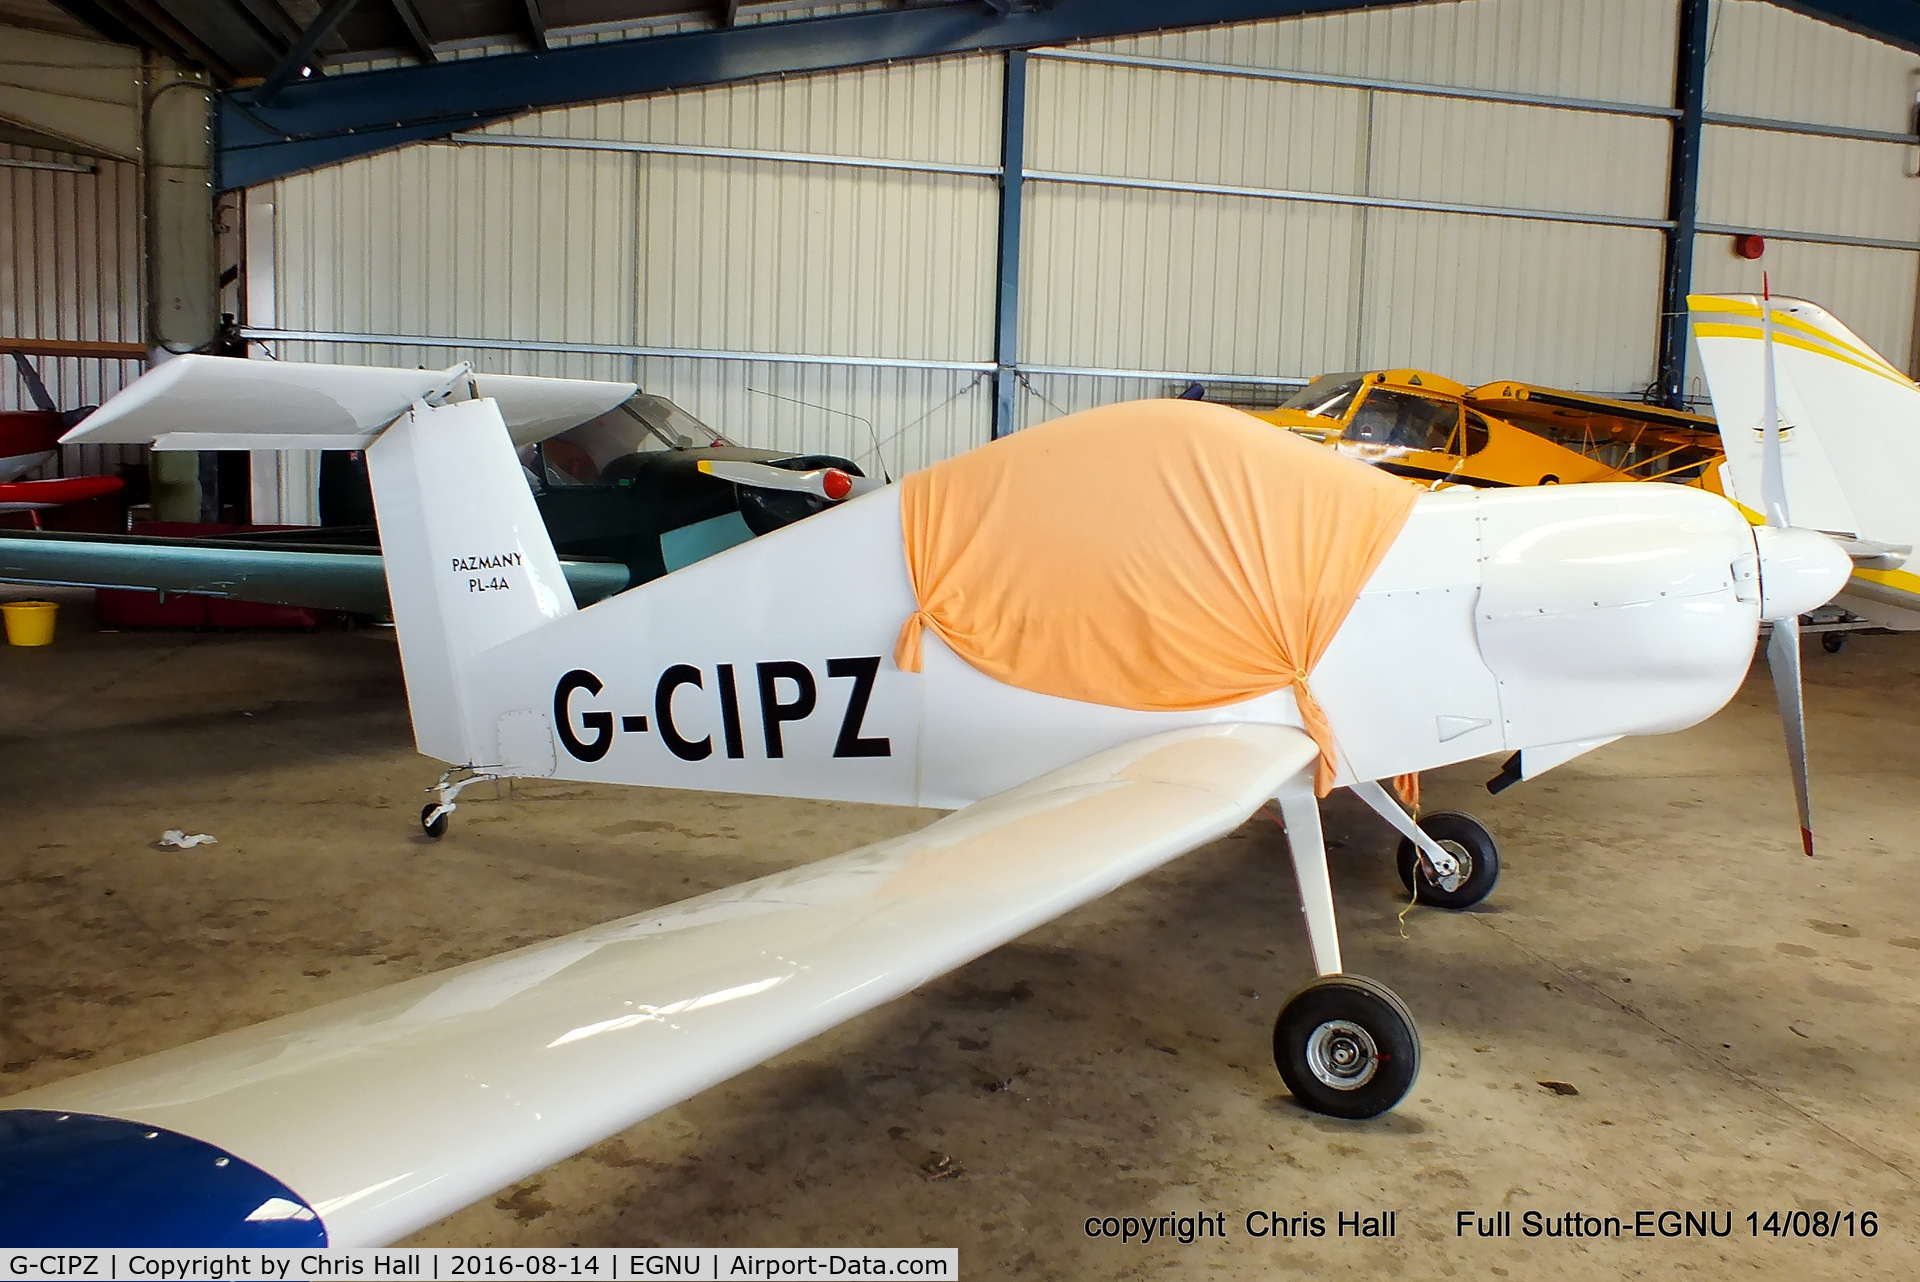 G-CIPZ, 2015 Pazmany PL-4 C/N PFA 017-10357, at the LAA Vale of York Strut fly-in, Full Sutton